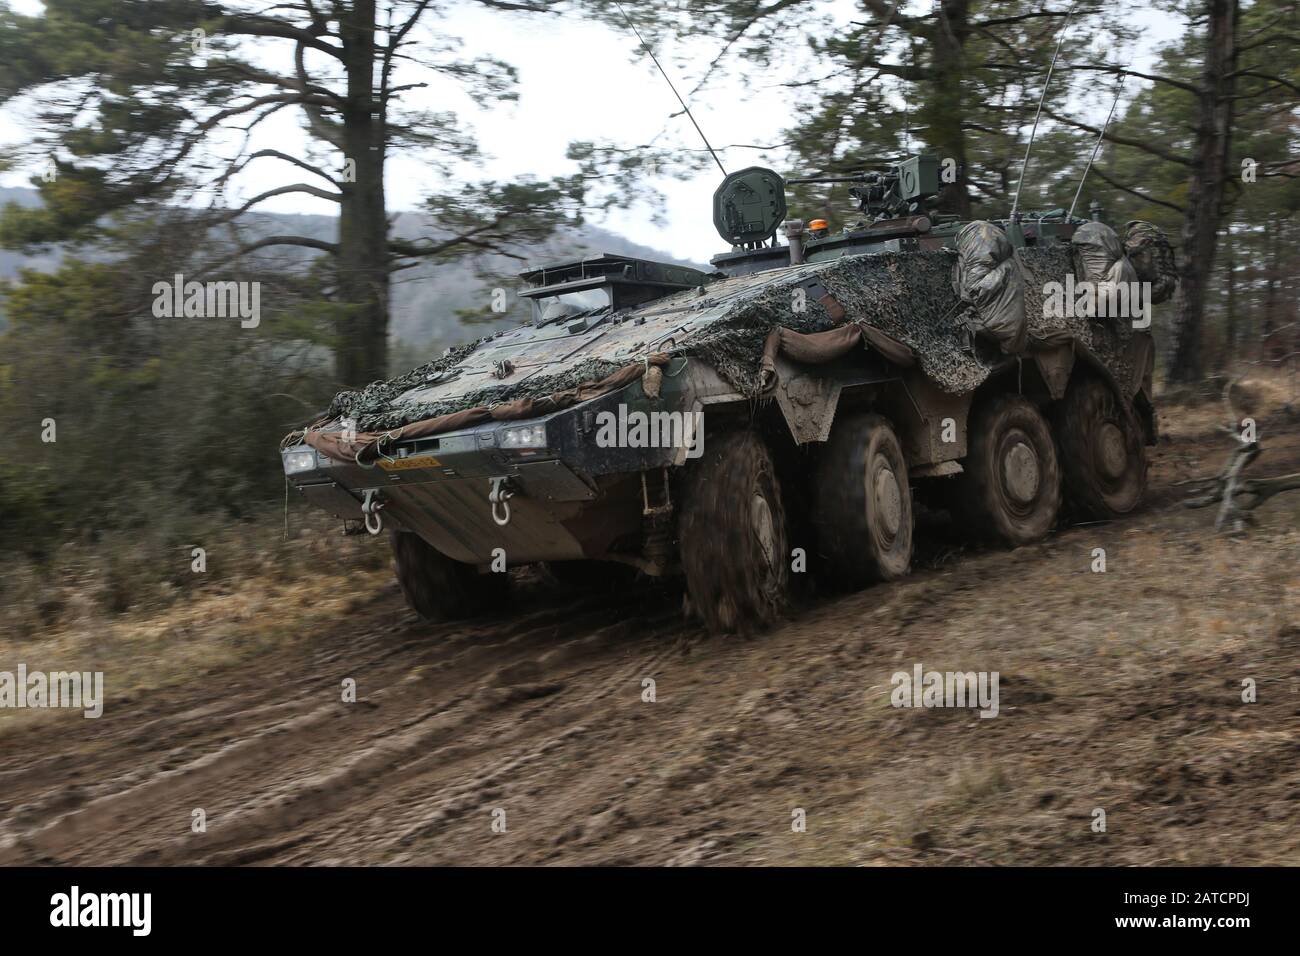 A Dutch GTK Boxer maneuvers through muddy terrain during Combined Resolve XIII at the Hohenfels Training Area in Hohenfels, Germany, Jan. 31, 2020. Combined Resolve XIII is a Headquarters Department of the Army directed Multinational Unified Land Operation exercise with the U.S. Regionally Aligned Force Brigade in support of European Command (EUCOM) objectives. The purpose of the exercise is to prepare the 2nd Armored Brigade Combat Team, 1st Cavalry Division along with 16 other allied and partner nations to fight and win in the European theater. The exercise involves more than 5,000 service m Stock Photo